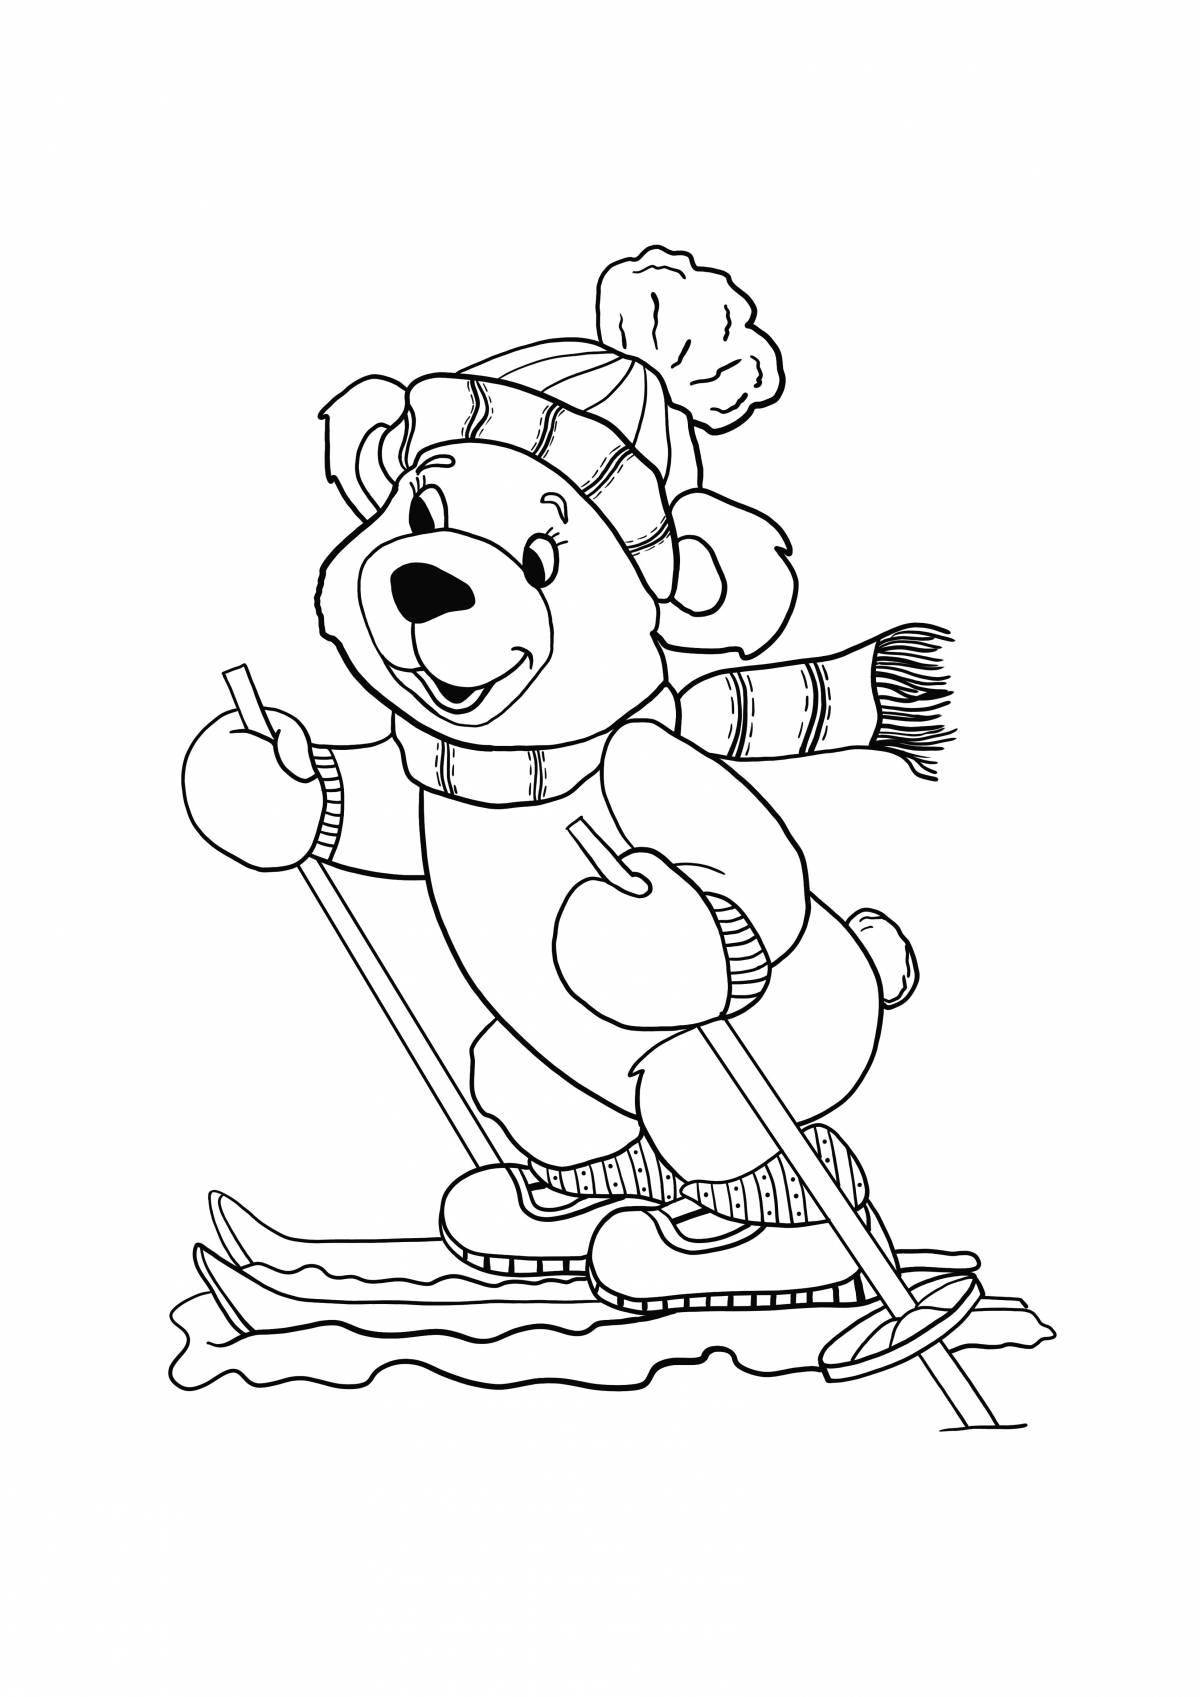 Coloring book bright bear on skis